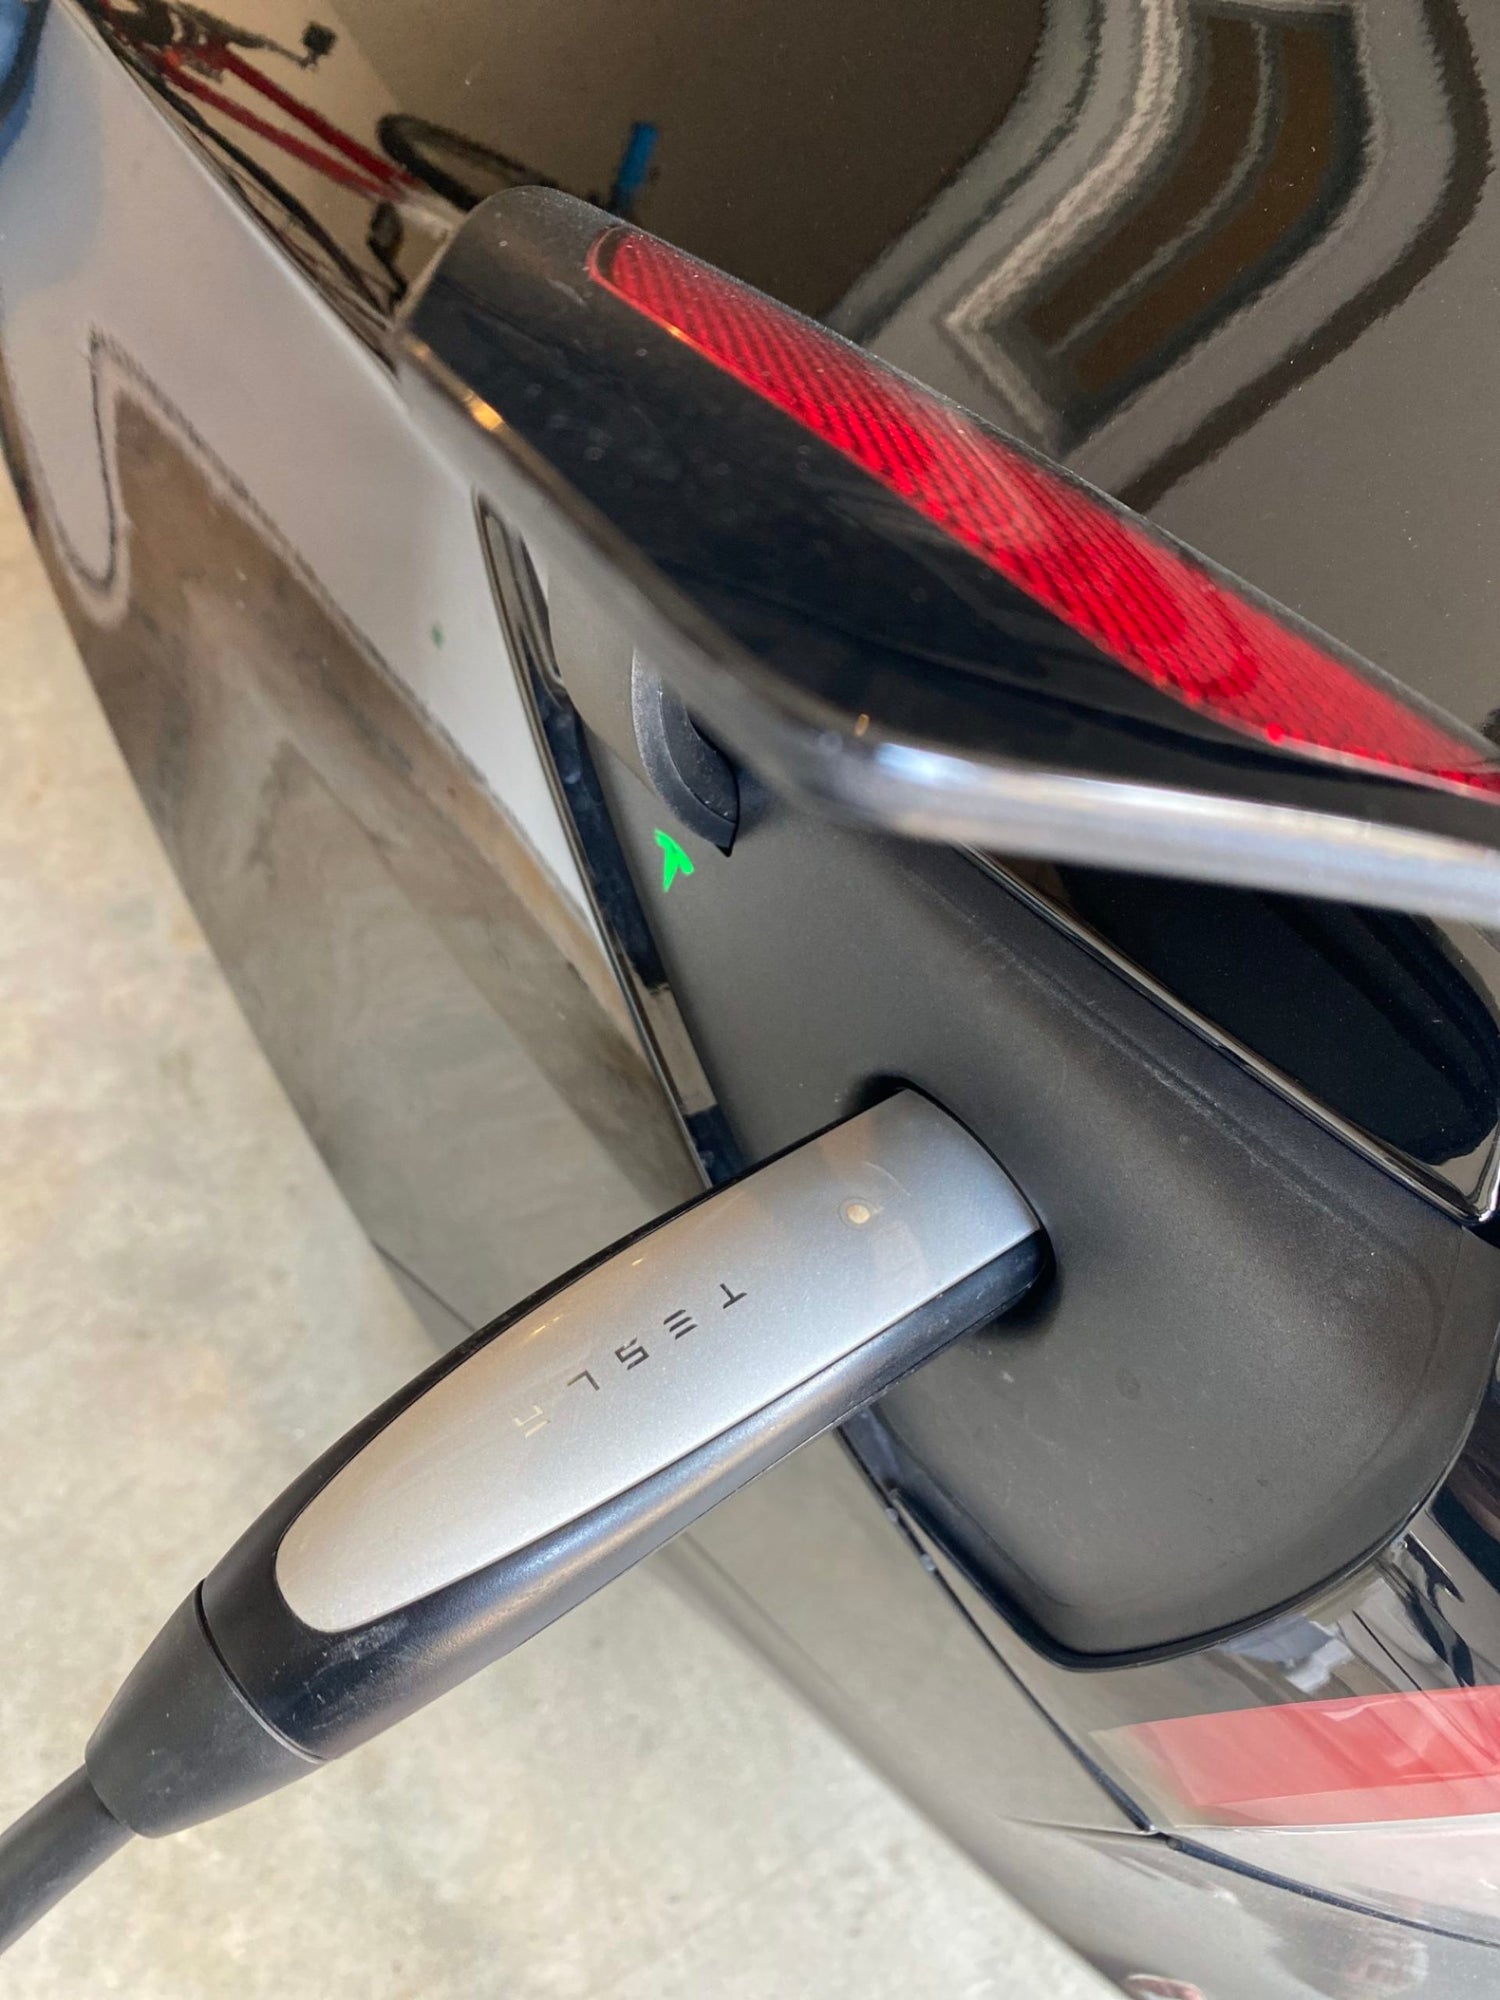 Electric vehicle Tesla charger plug. Garage Charge at home electric vehicle EV charging station installation. Free consultation for EV charger installation projects in Central Virginia, Richmond, Charlottesville, Harrisonburg, Lynchburg.